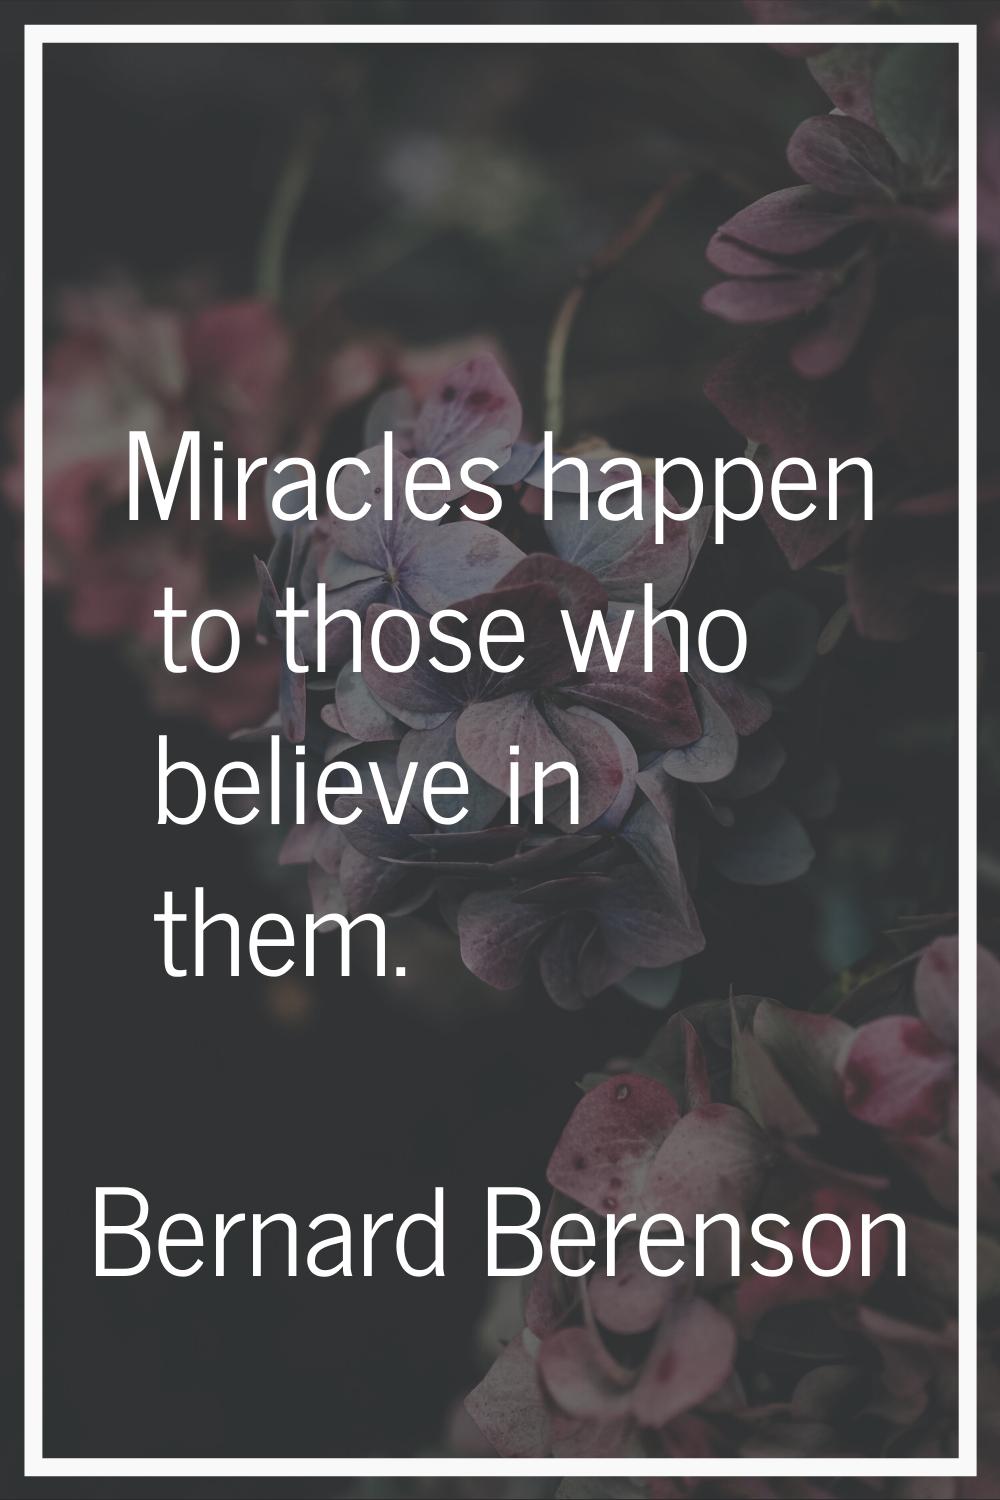 Miracles happen to those who believe in them.